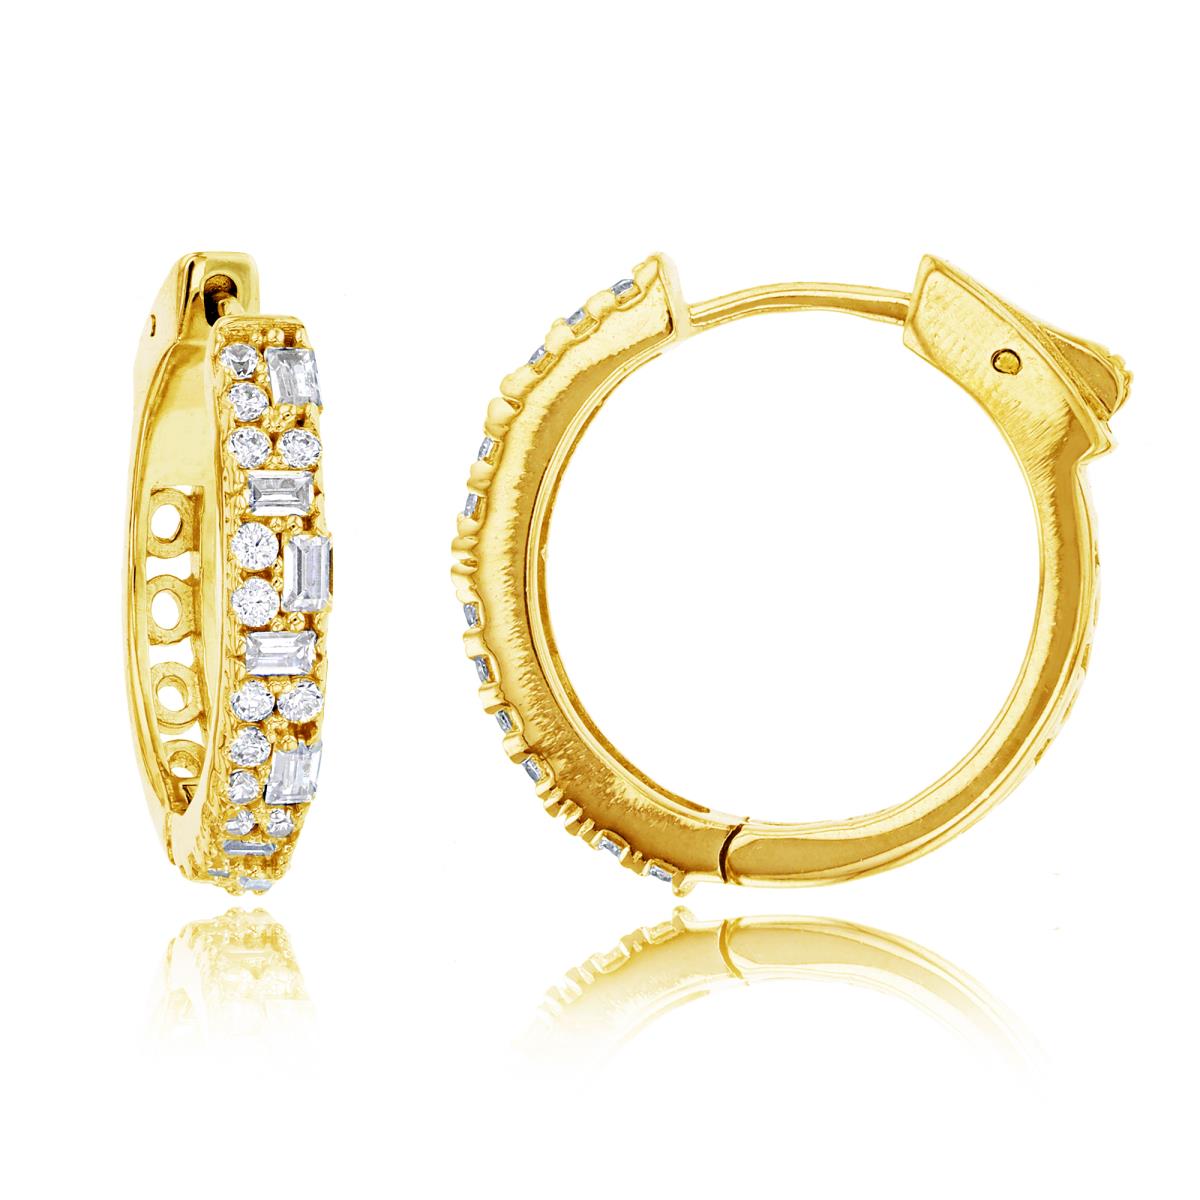 Sterling Silver Yellow 20x4mm 2-Row Micropave Baguette & Rd Cut CZ Hoop Earring with Safety Lock